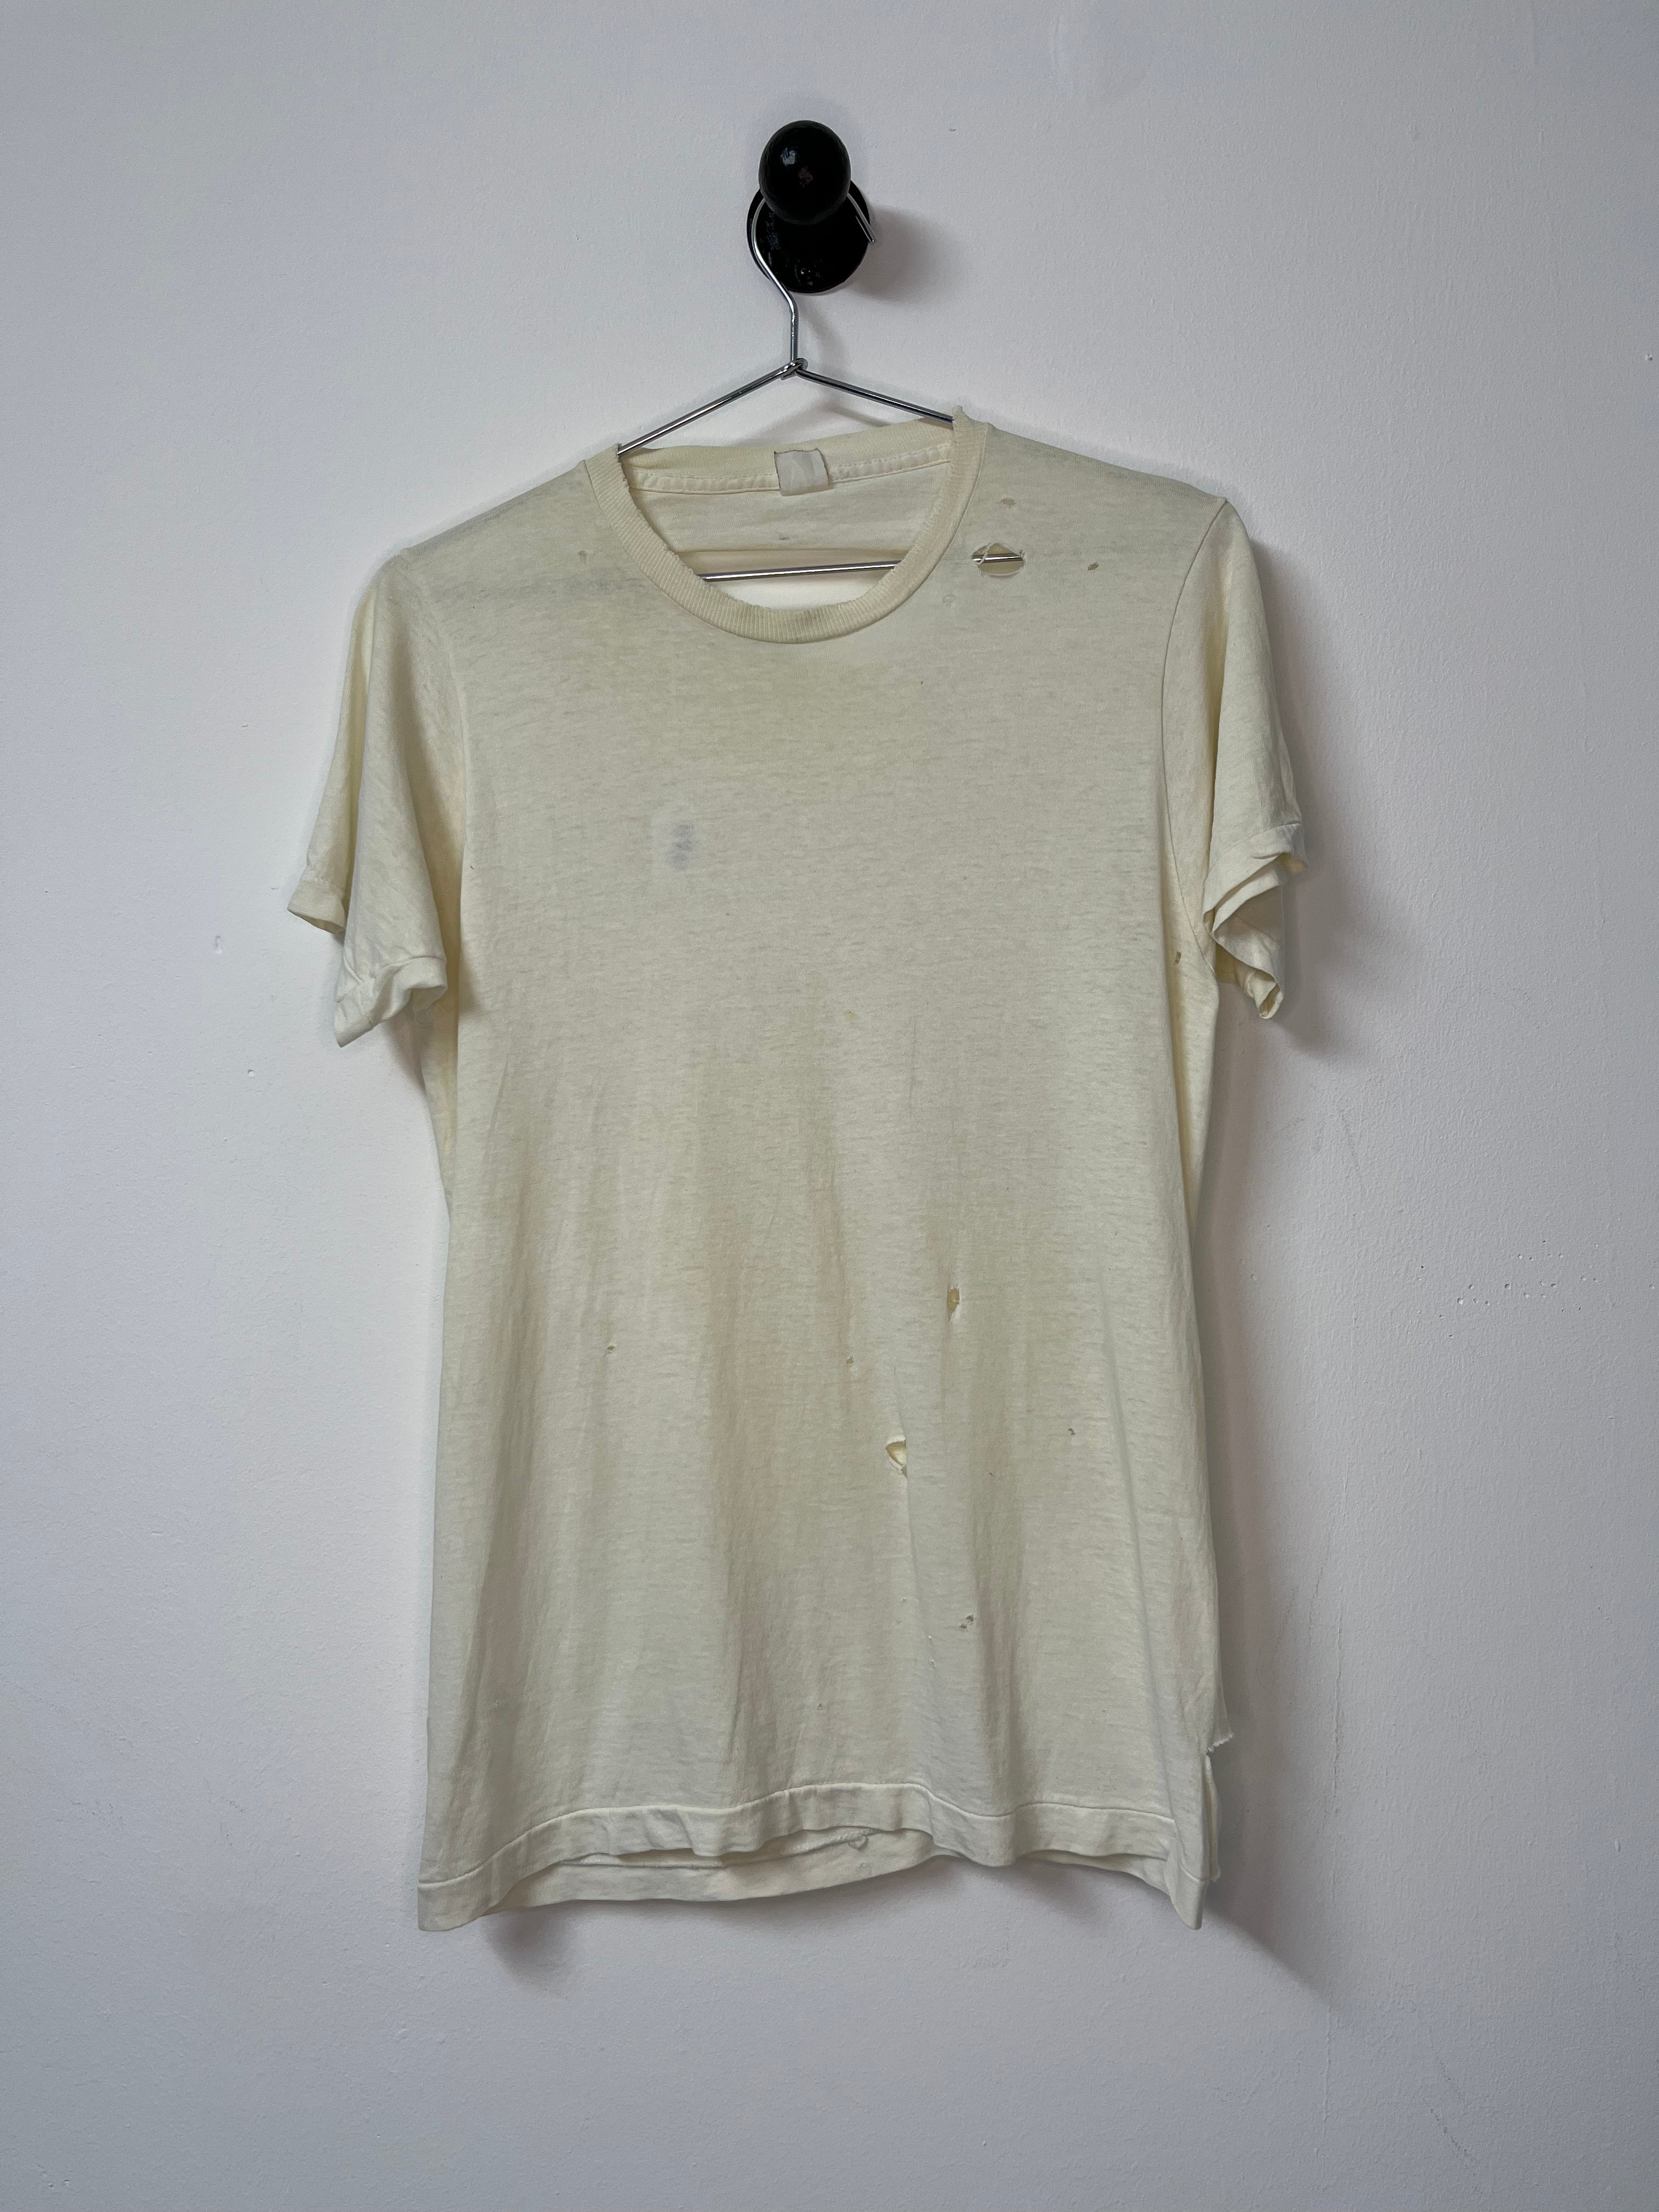 60/70s Distressed Blank White Tee - Aged White - M/L